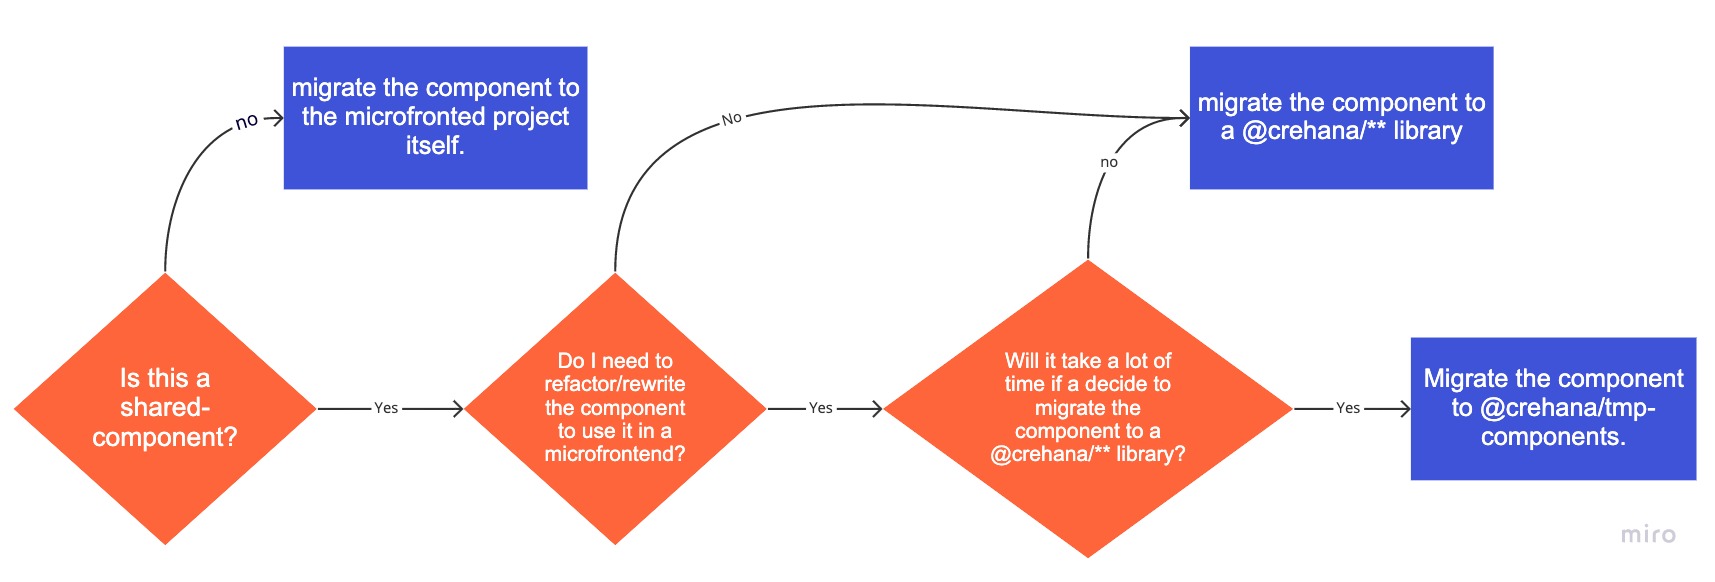 Process to migrate a component to @crehana/tmp-web